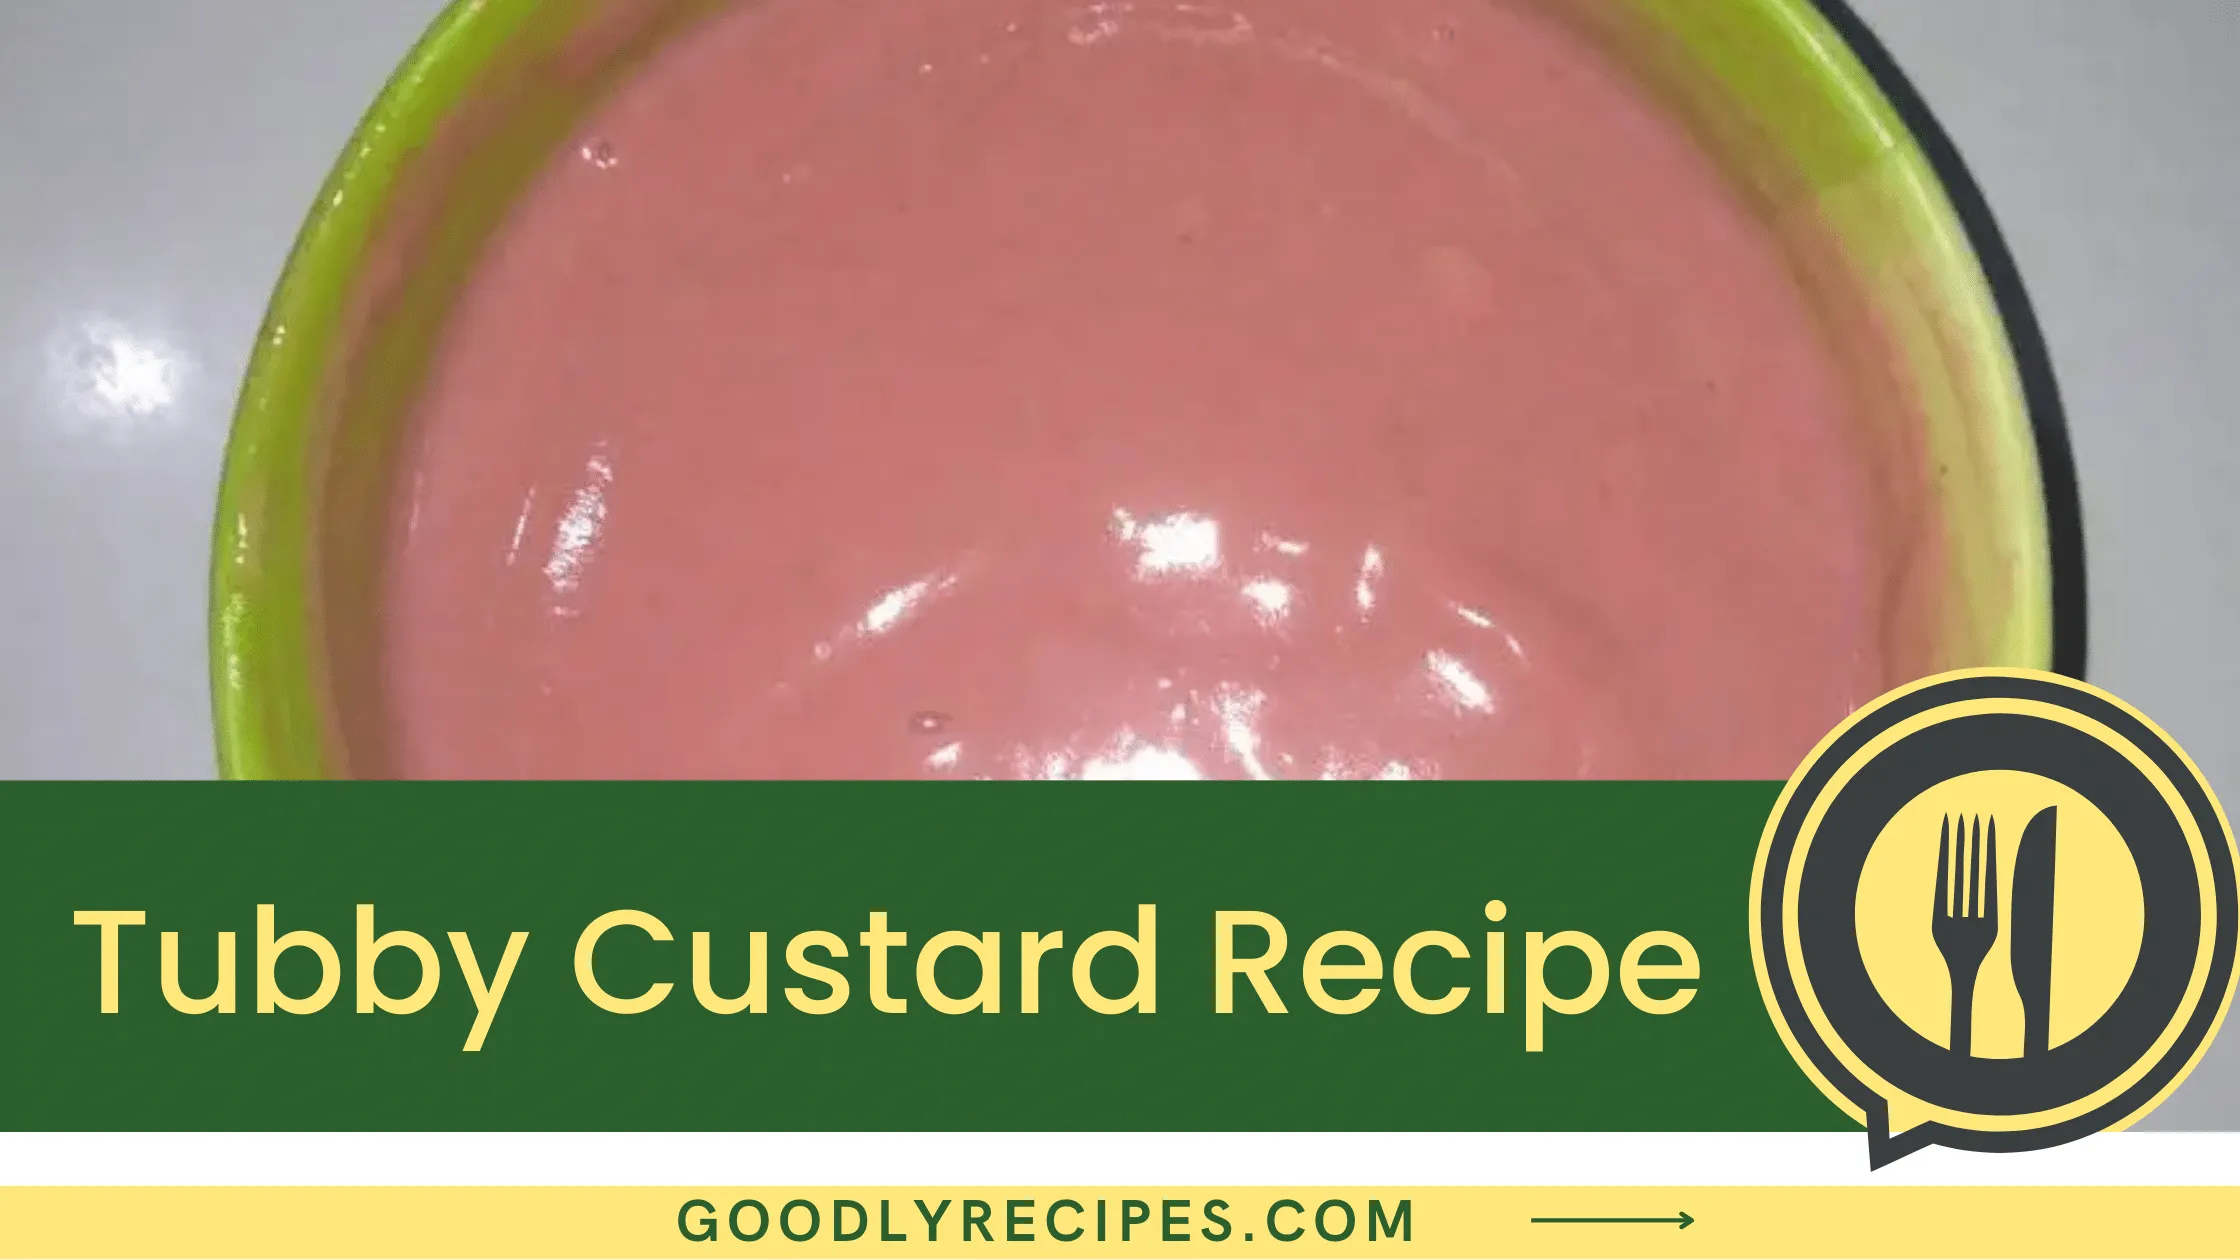 Tubby Custard Recipe - For Food Lovers